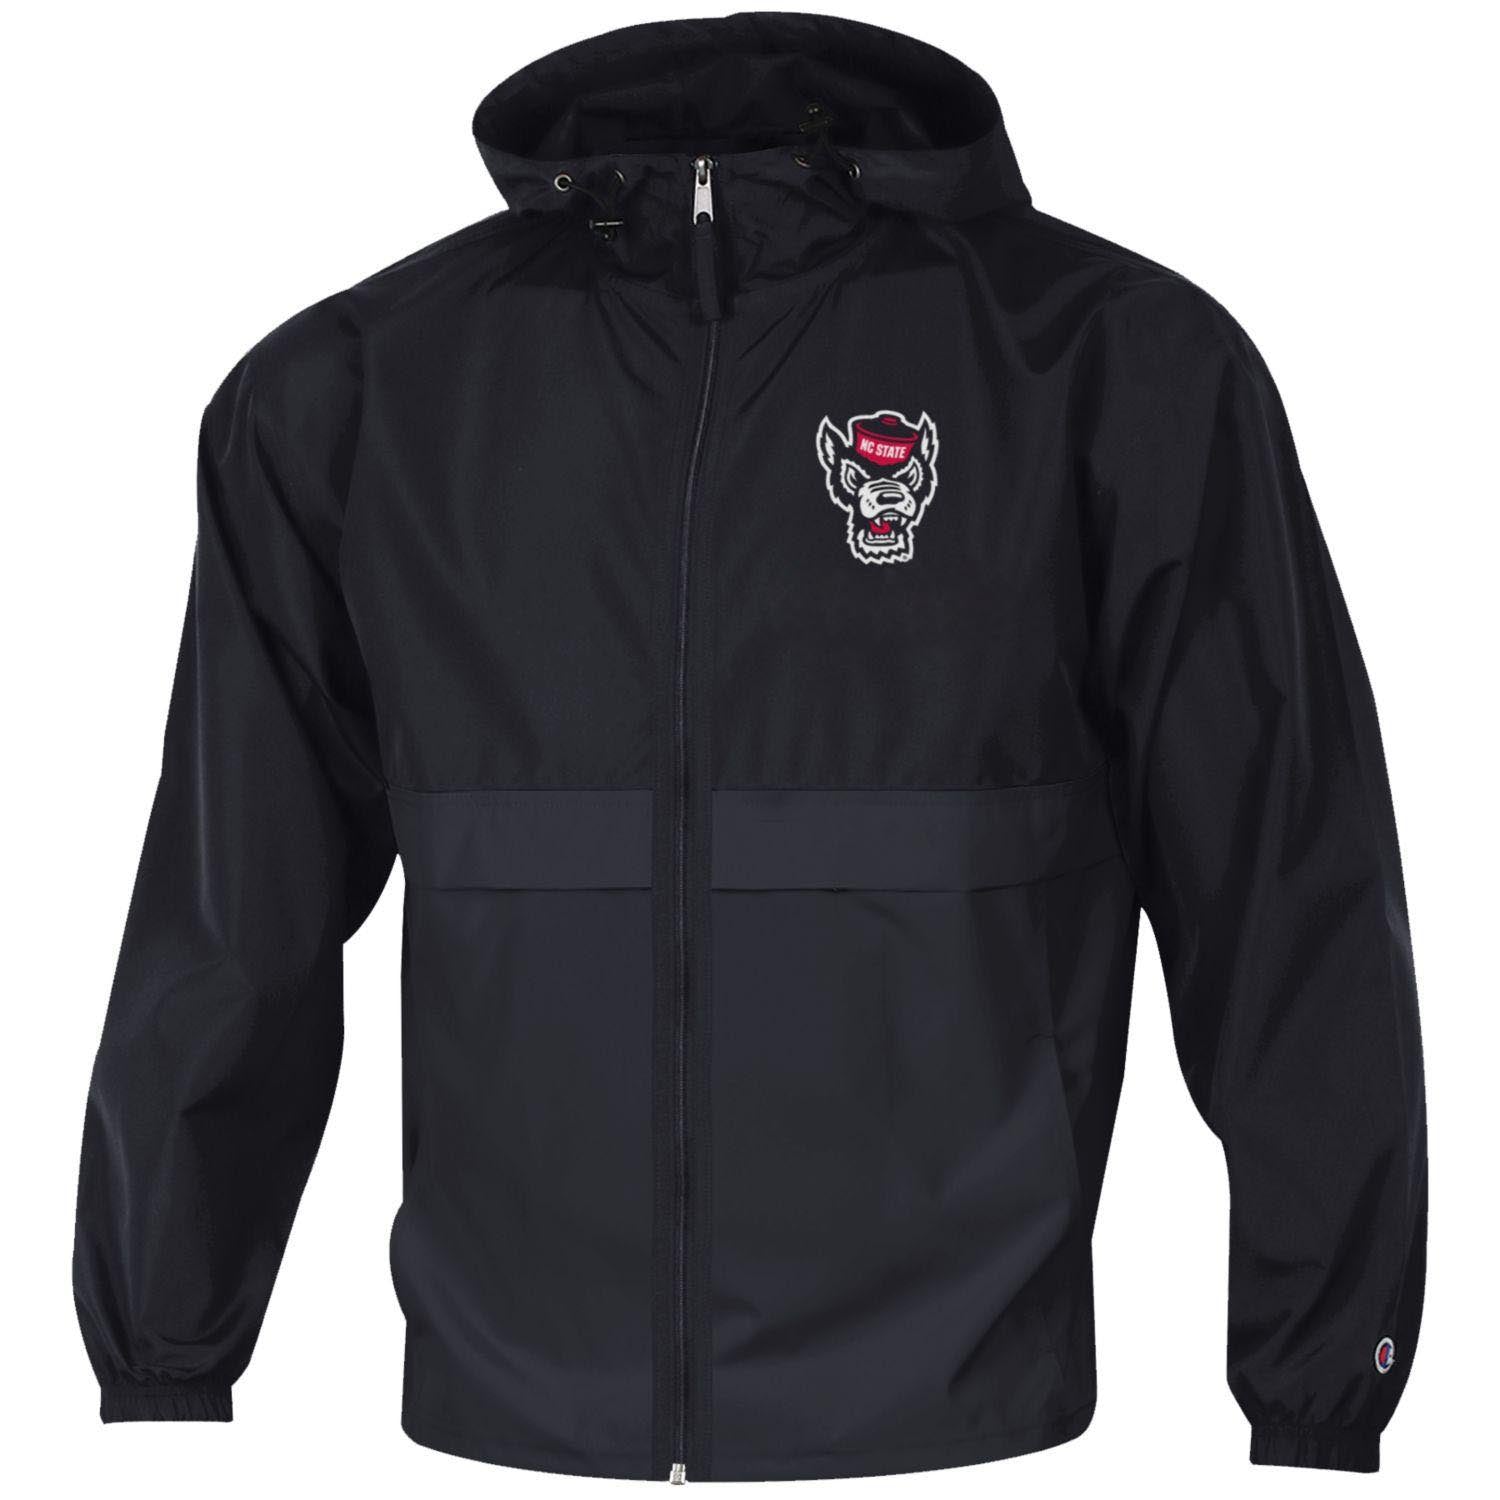 NC State Wolfpack Champion Youth Black Light Weight Full Zip Jacket